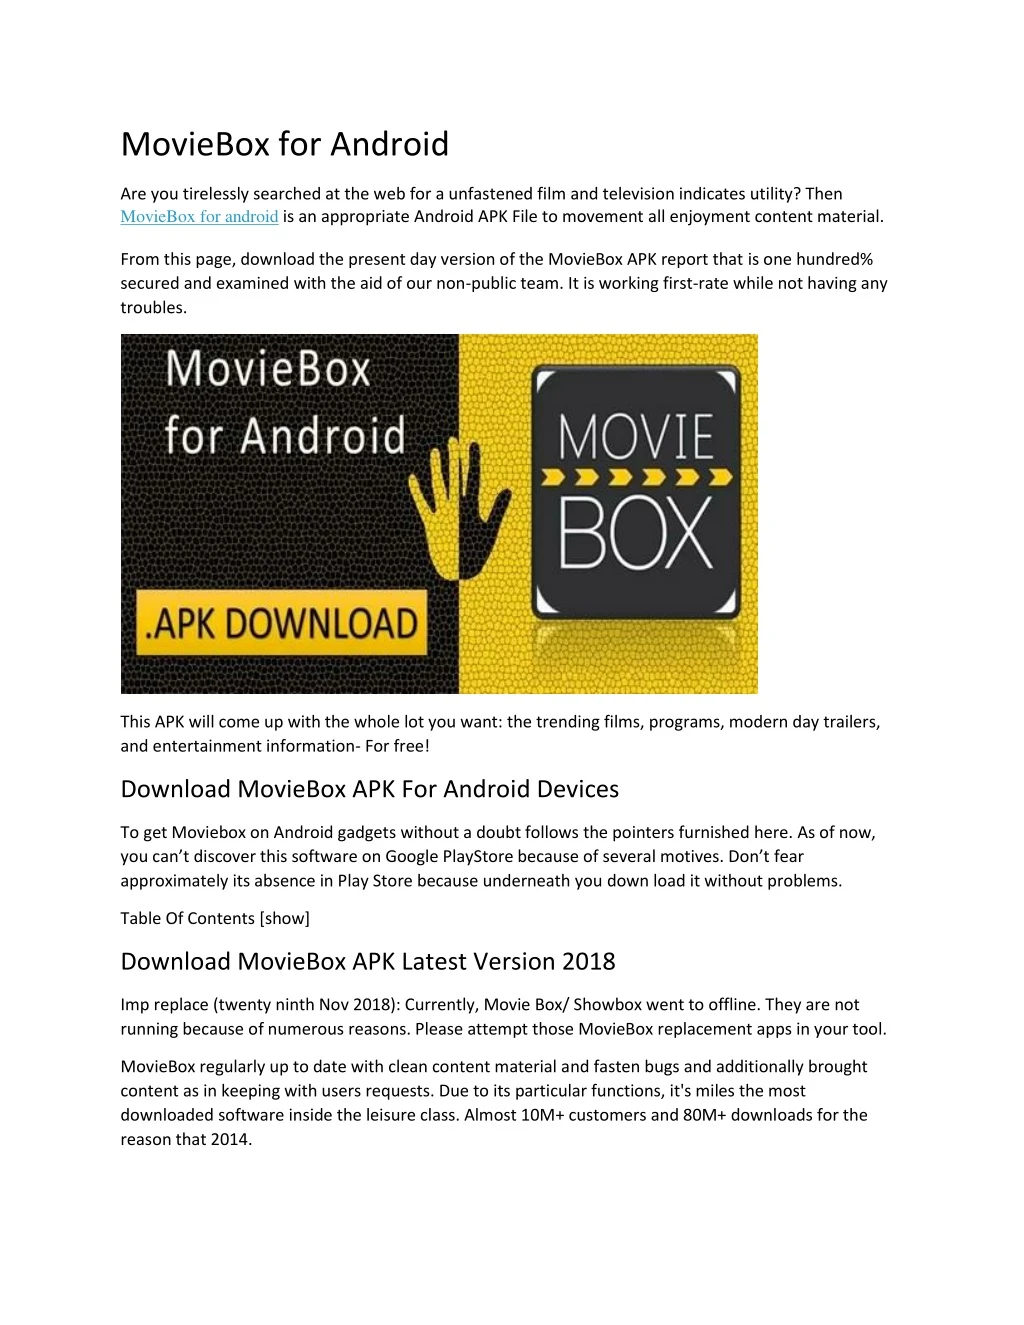 moviebox for android